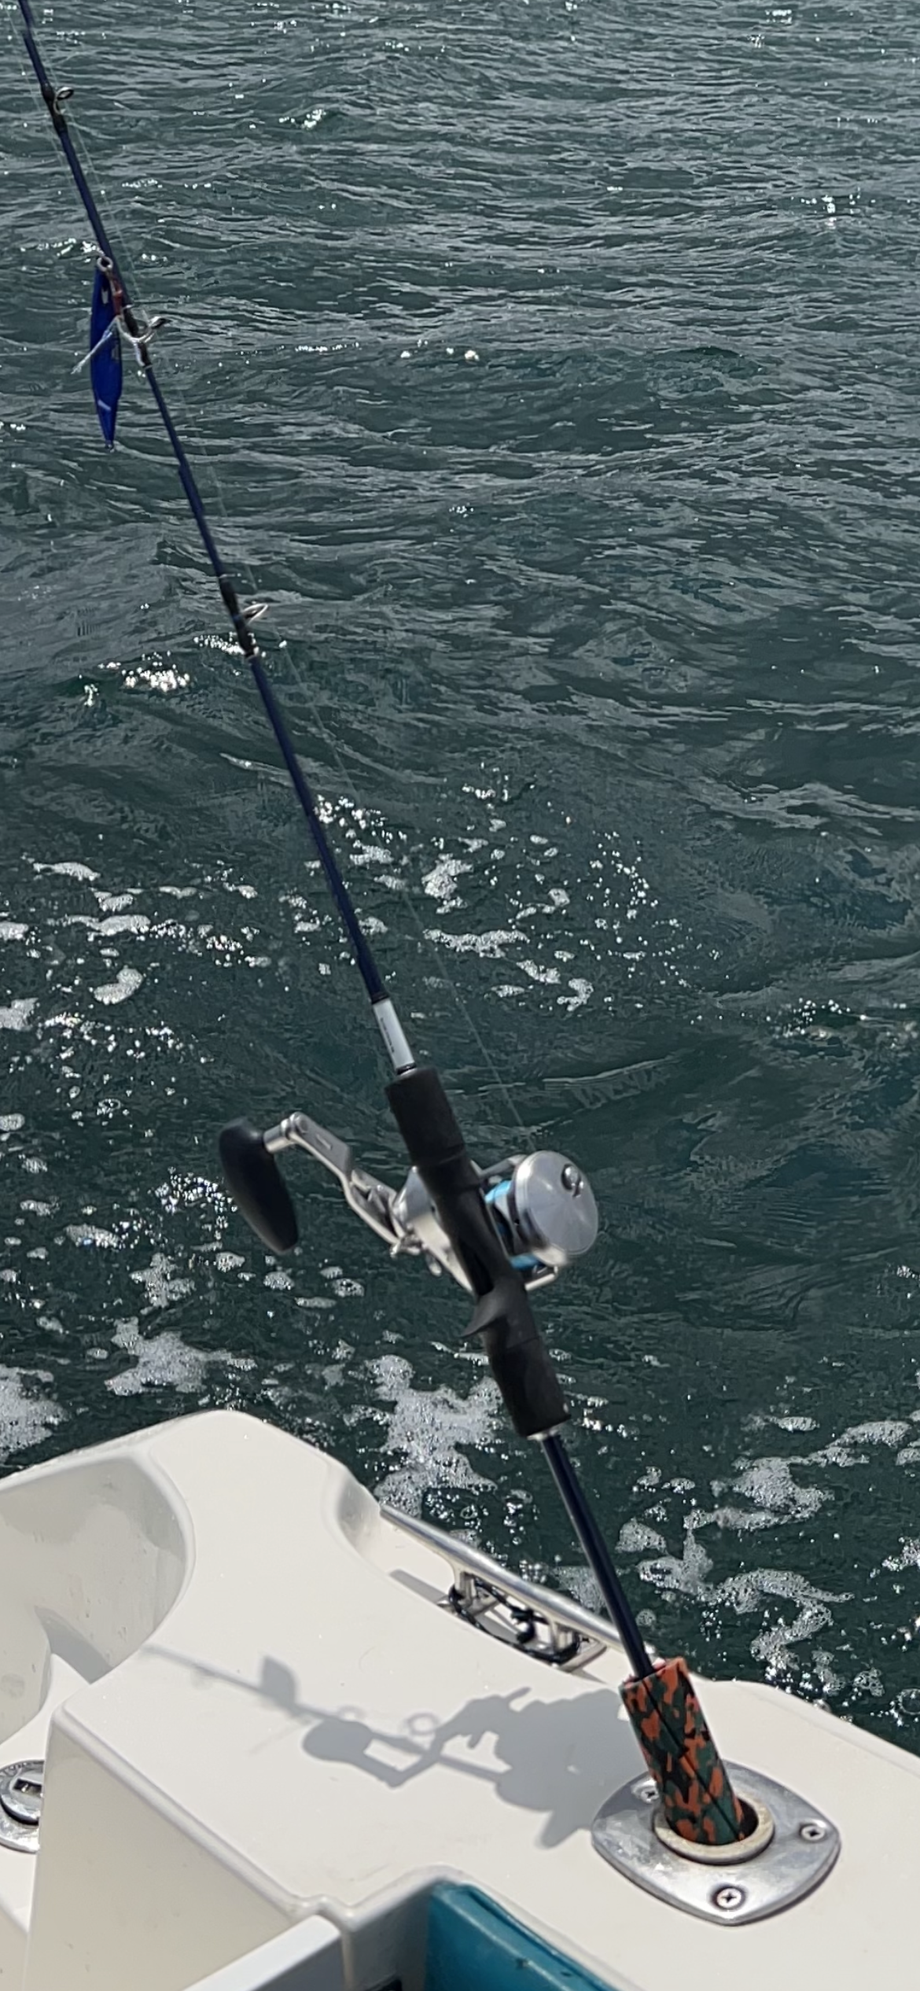 How do you transport your jigging rods? - The Hull Truth - Boating